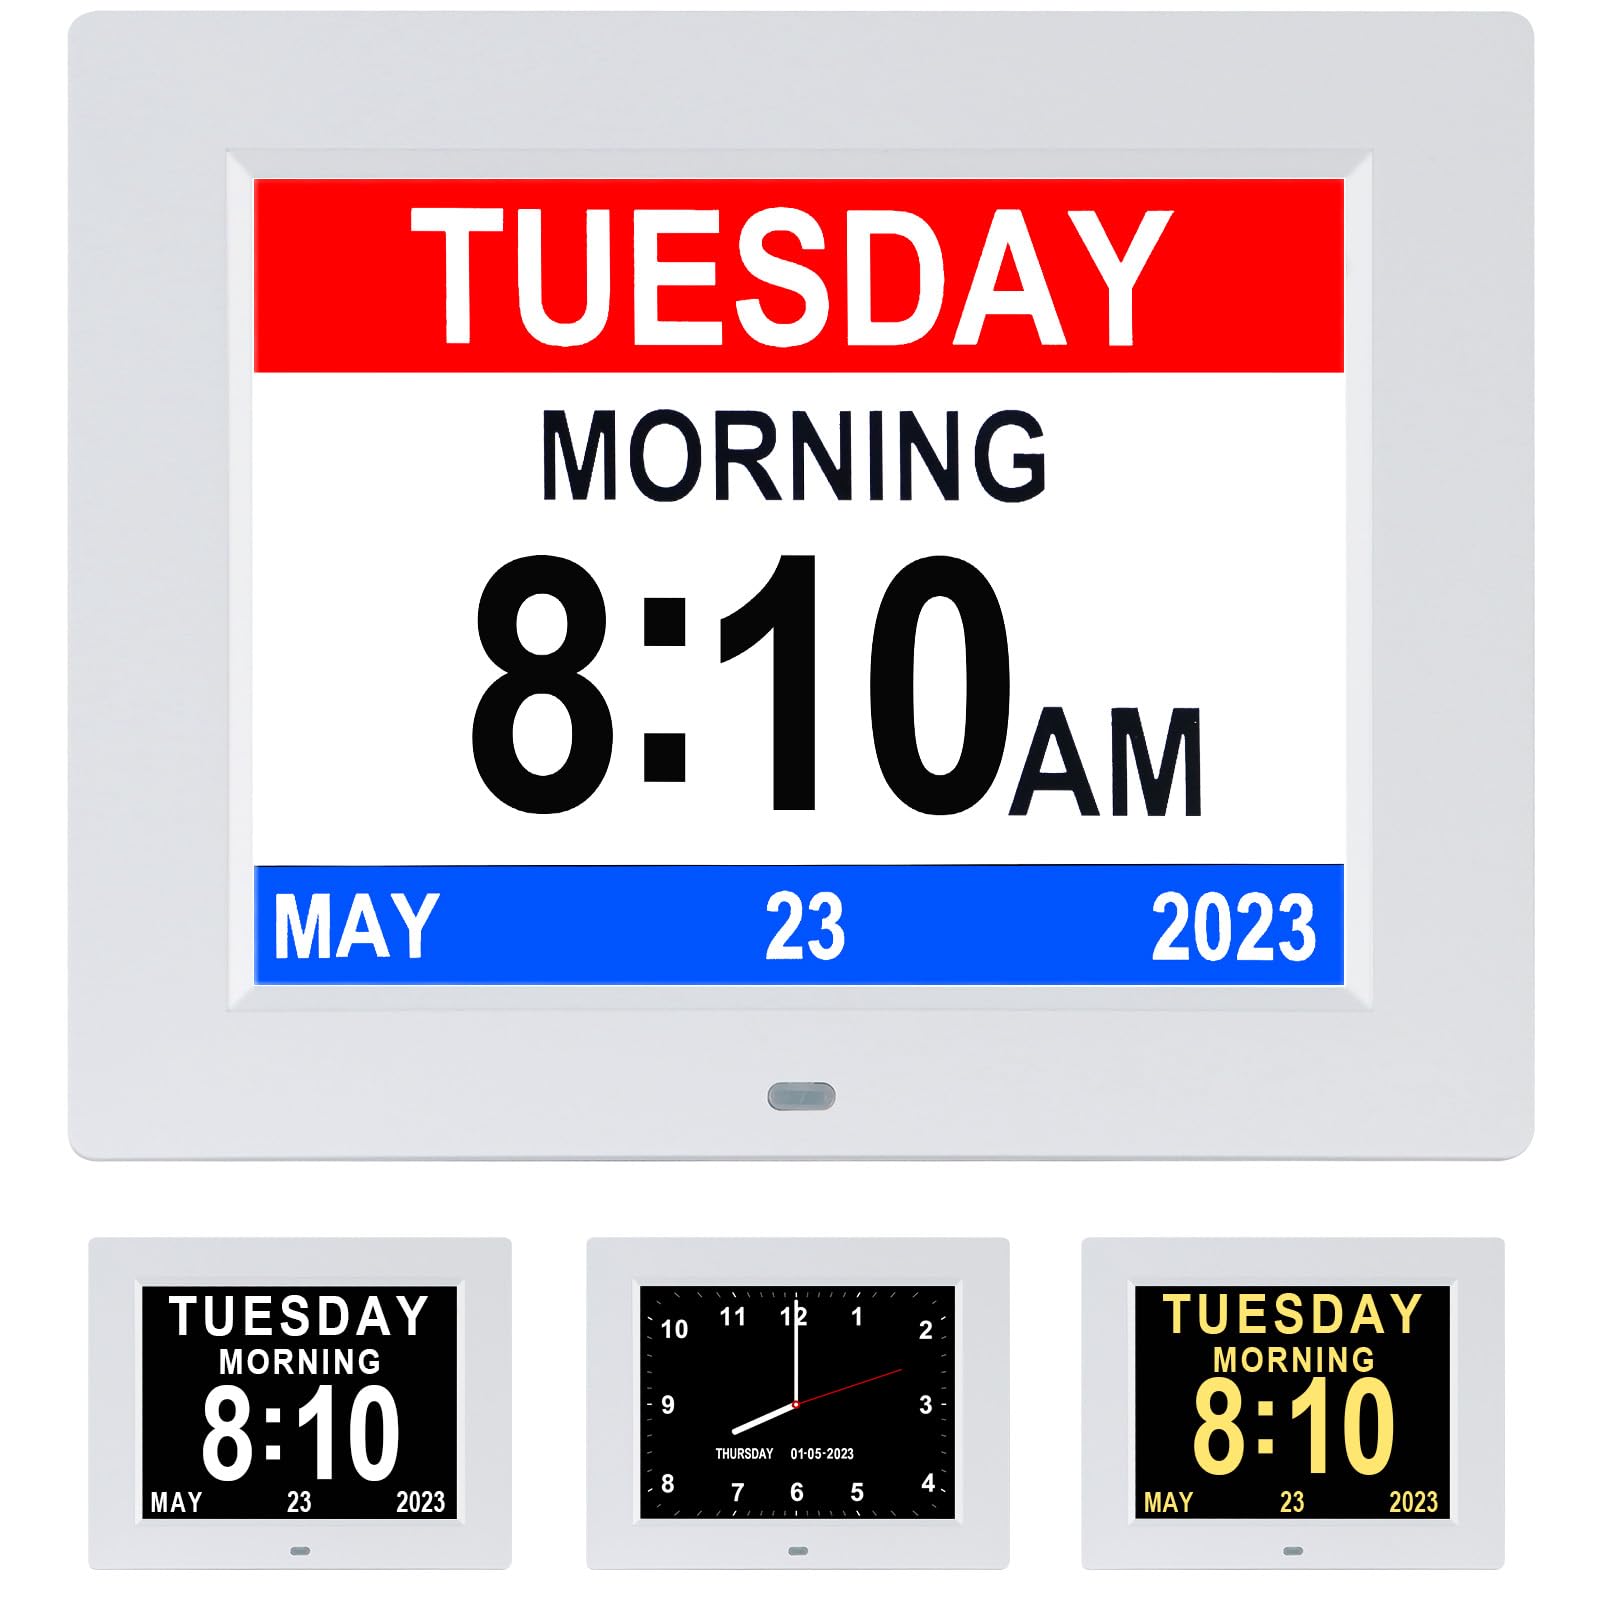 Calendar and clock showing the correct date and time.